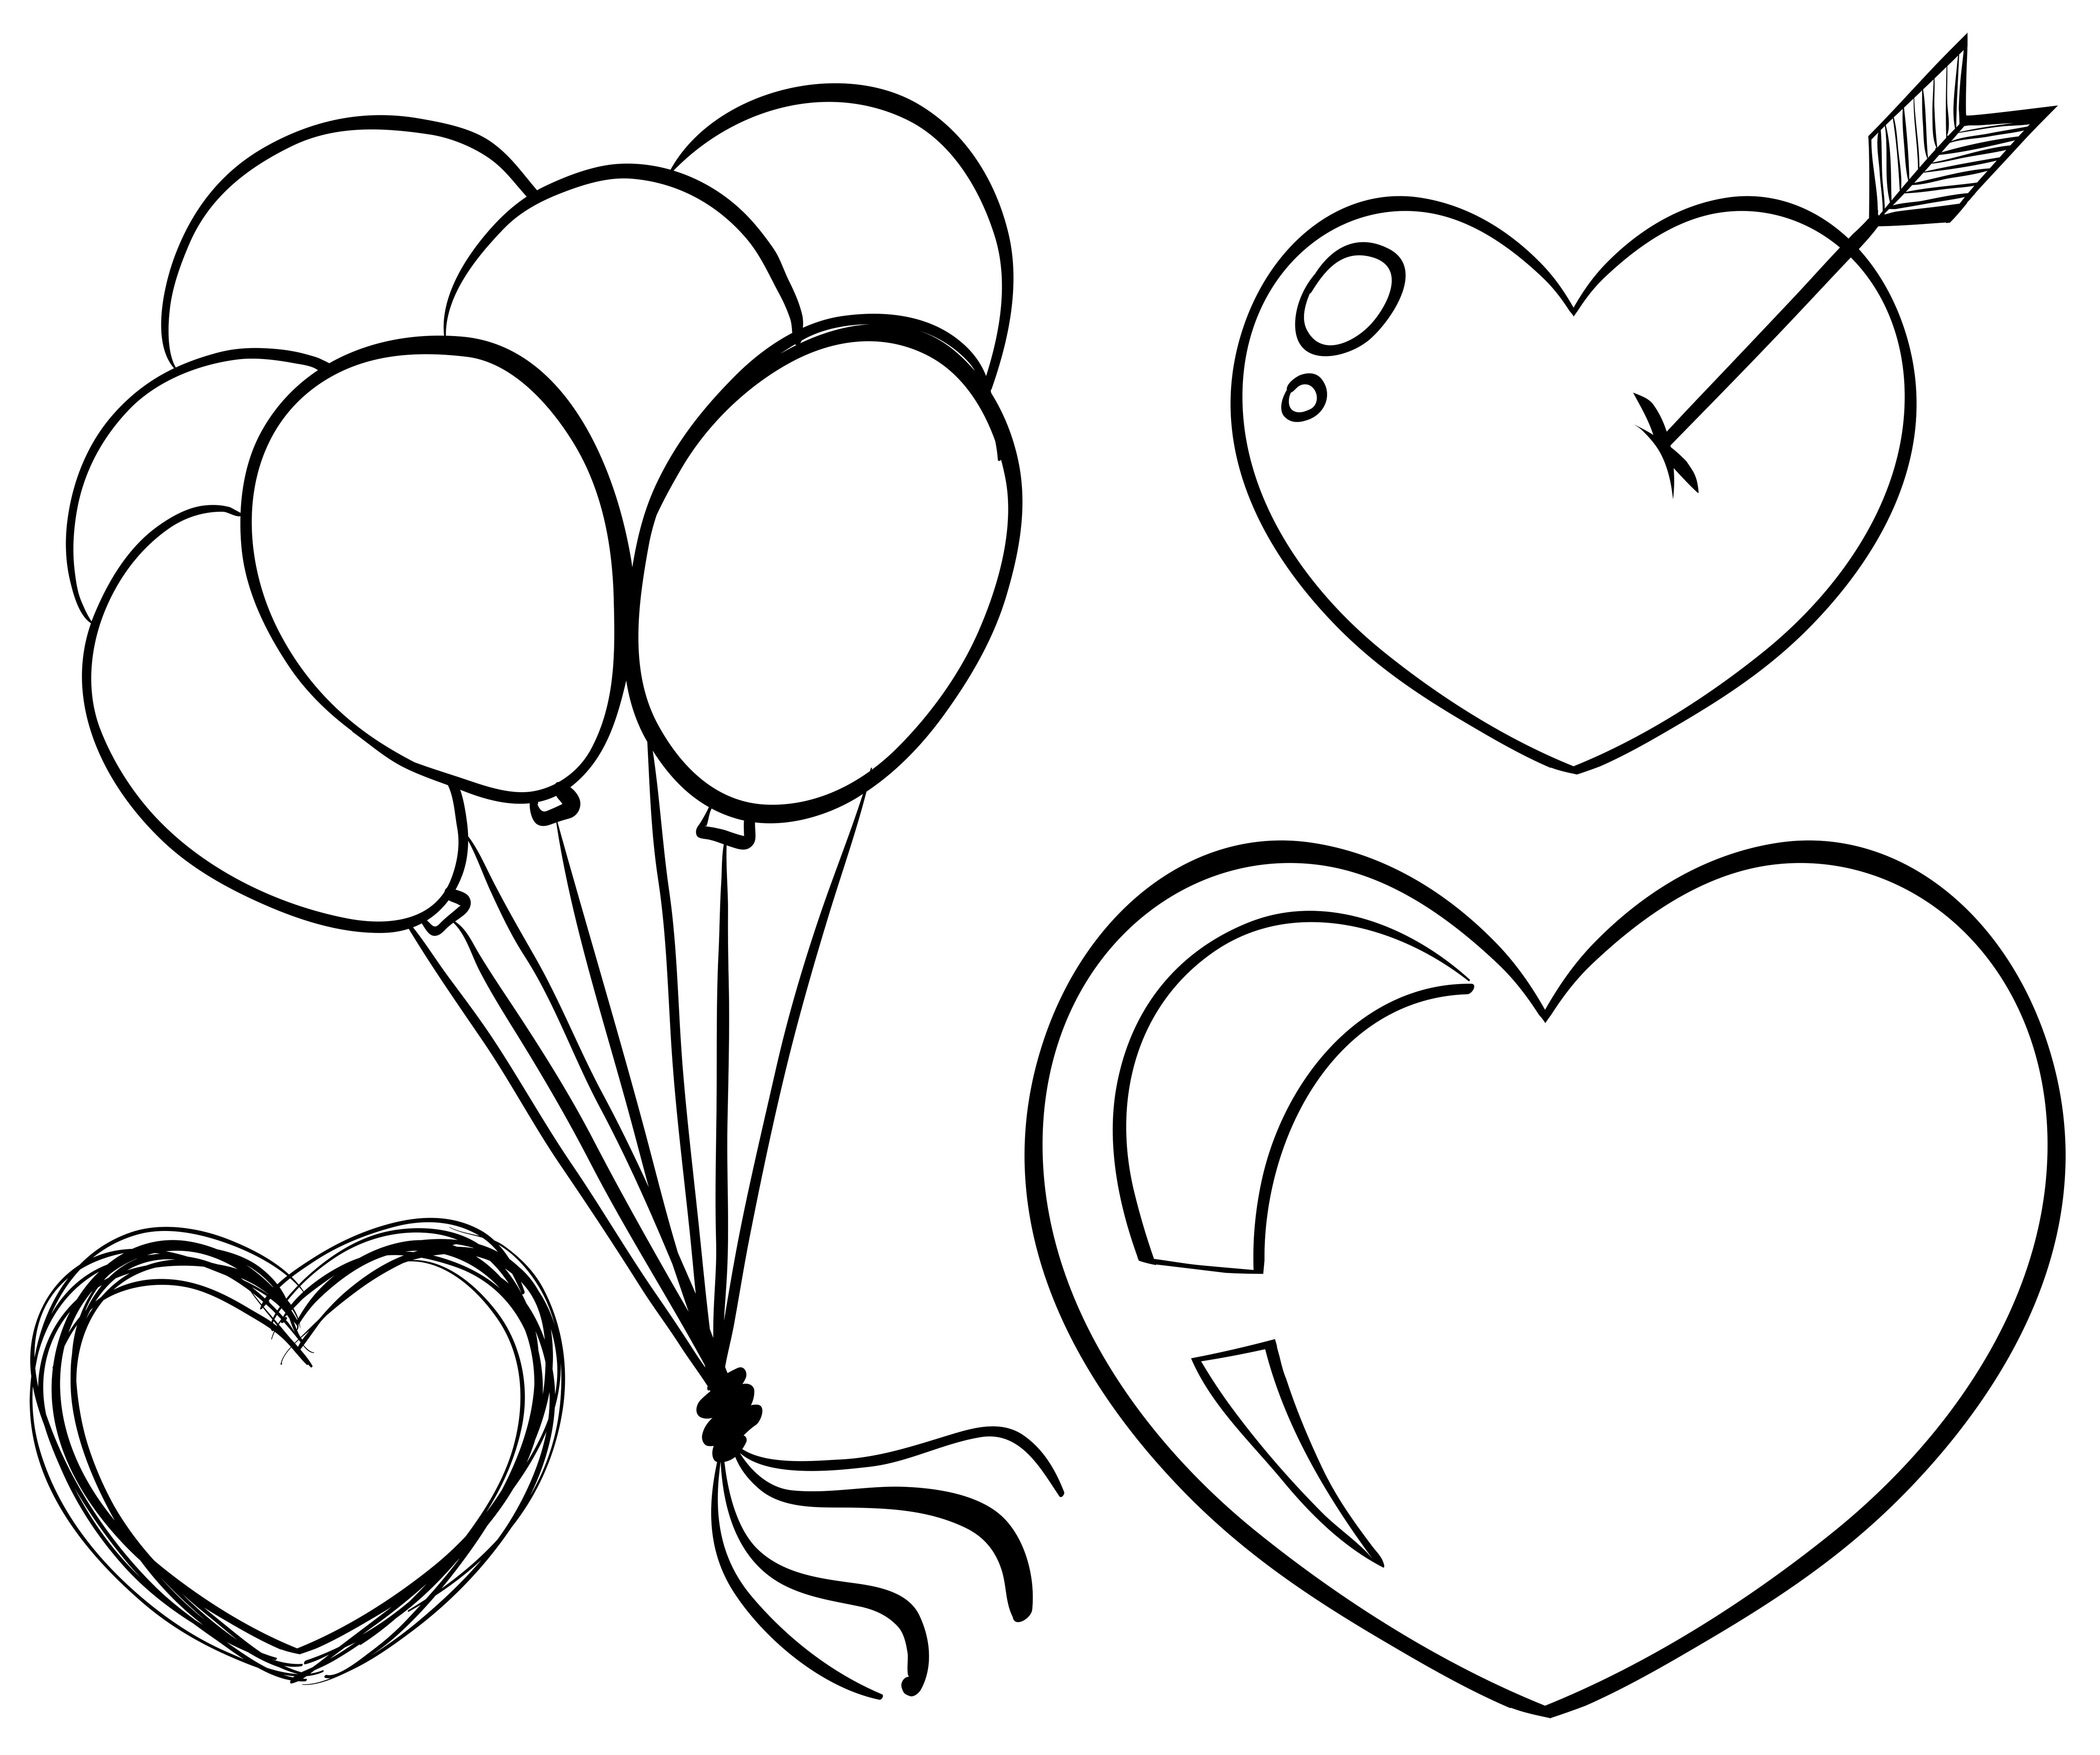 Download Doodle art for balloons and hearts - Download Free Vectors ...